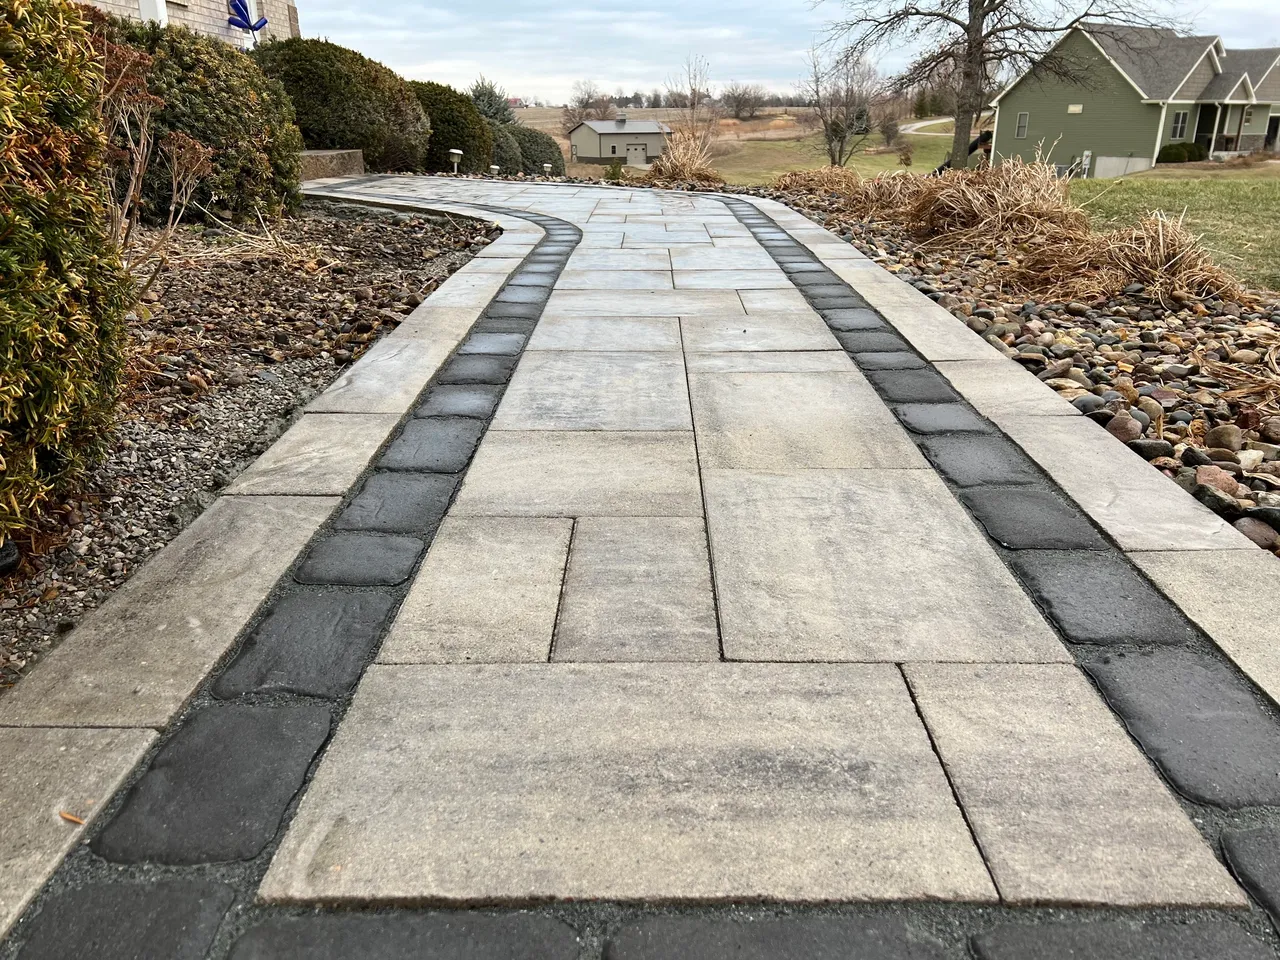 A walkway with black and white tiles on the sides.